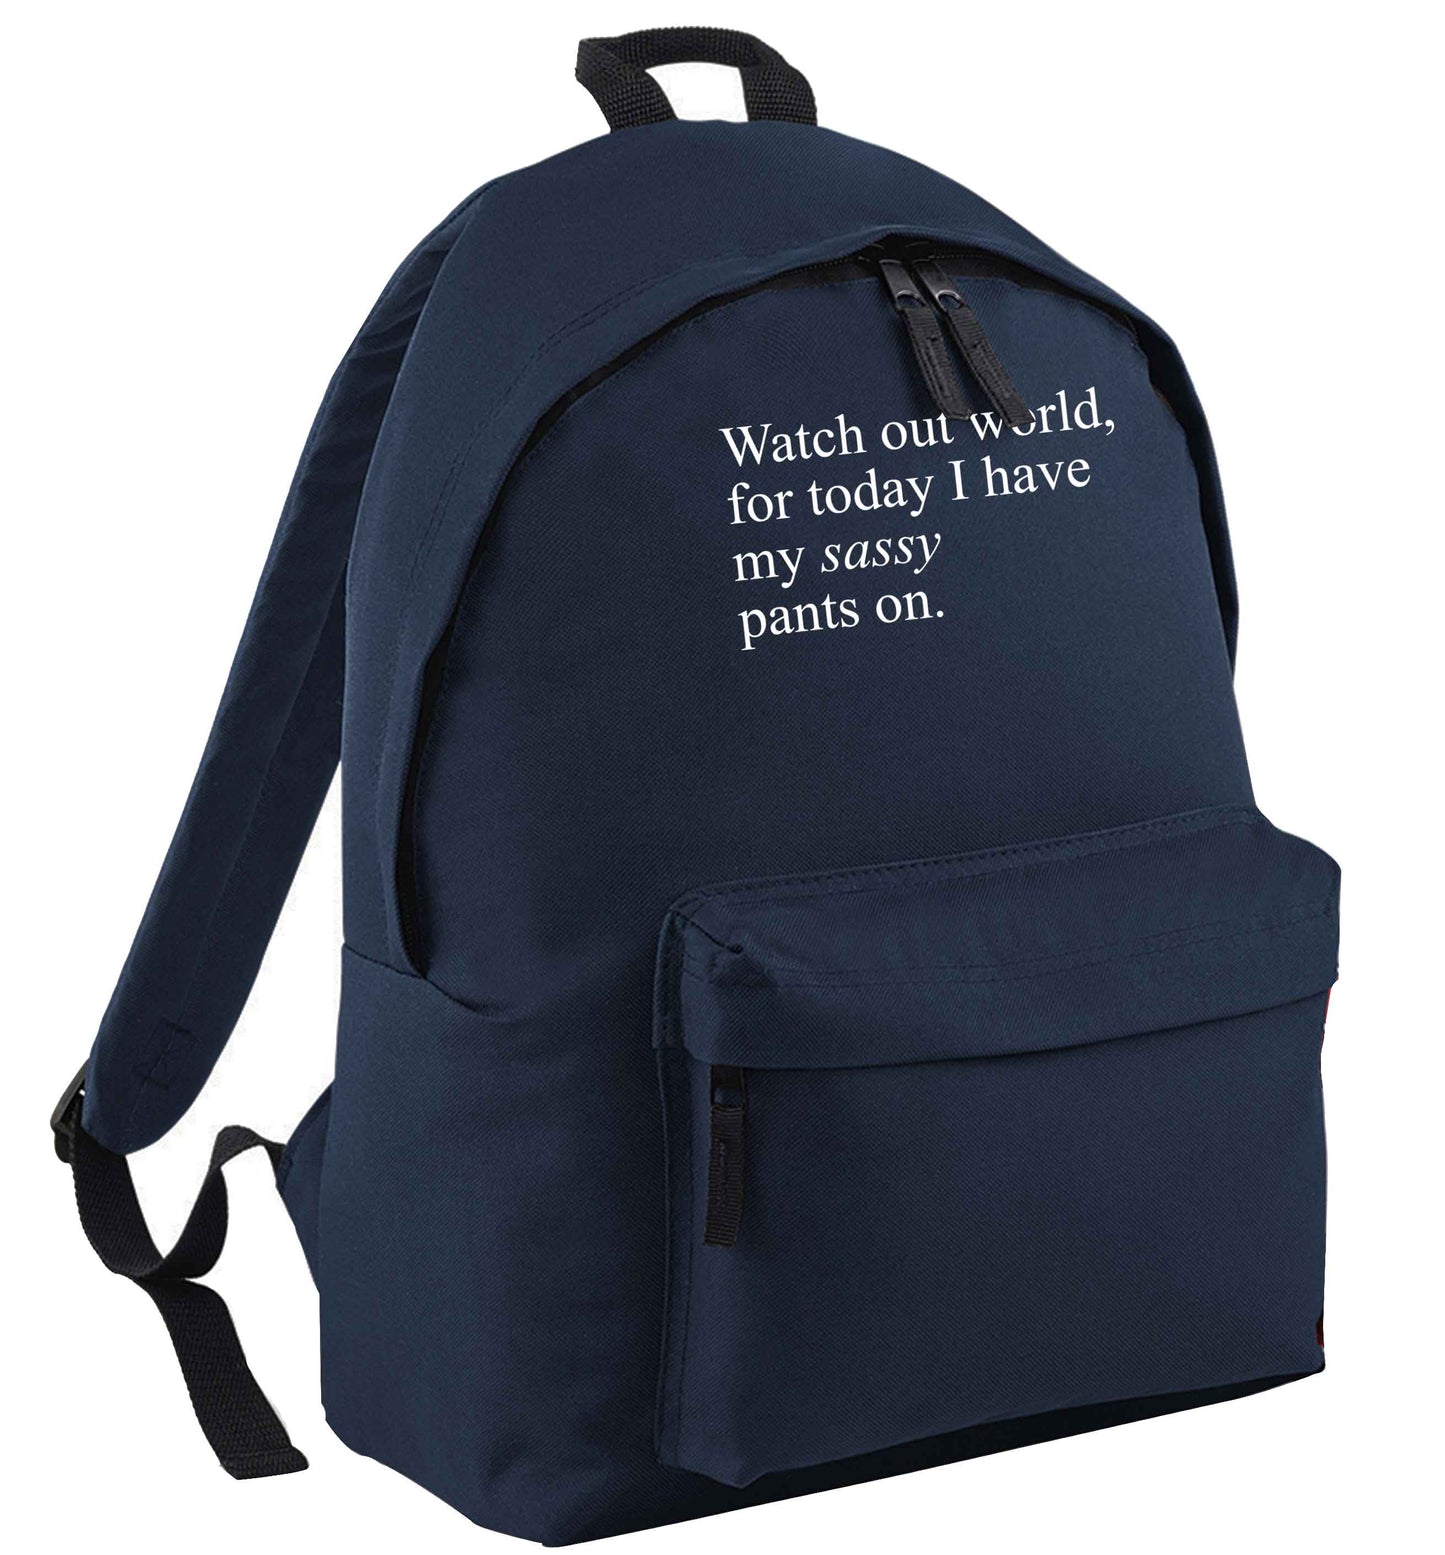 Watch out world for today I have my sassy pants on navy childrens backpack